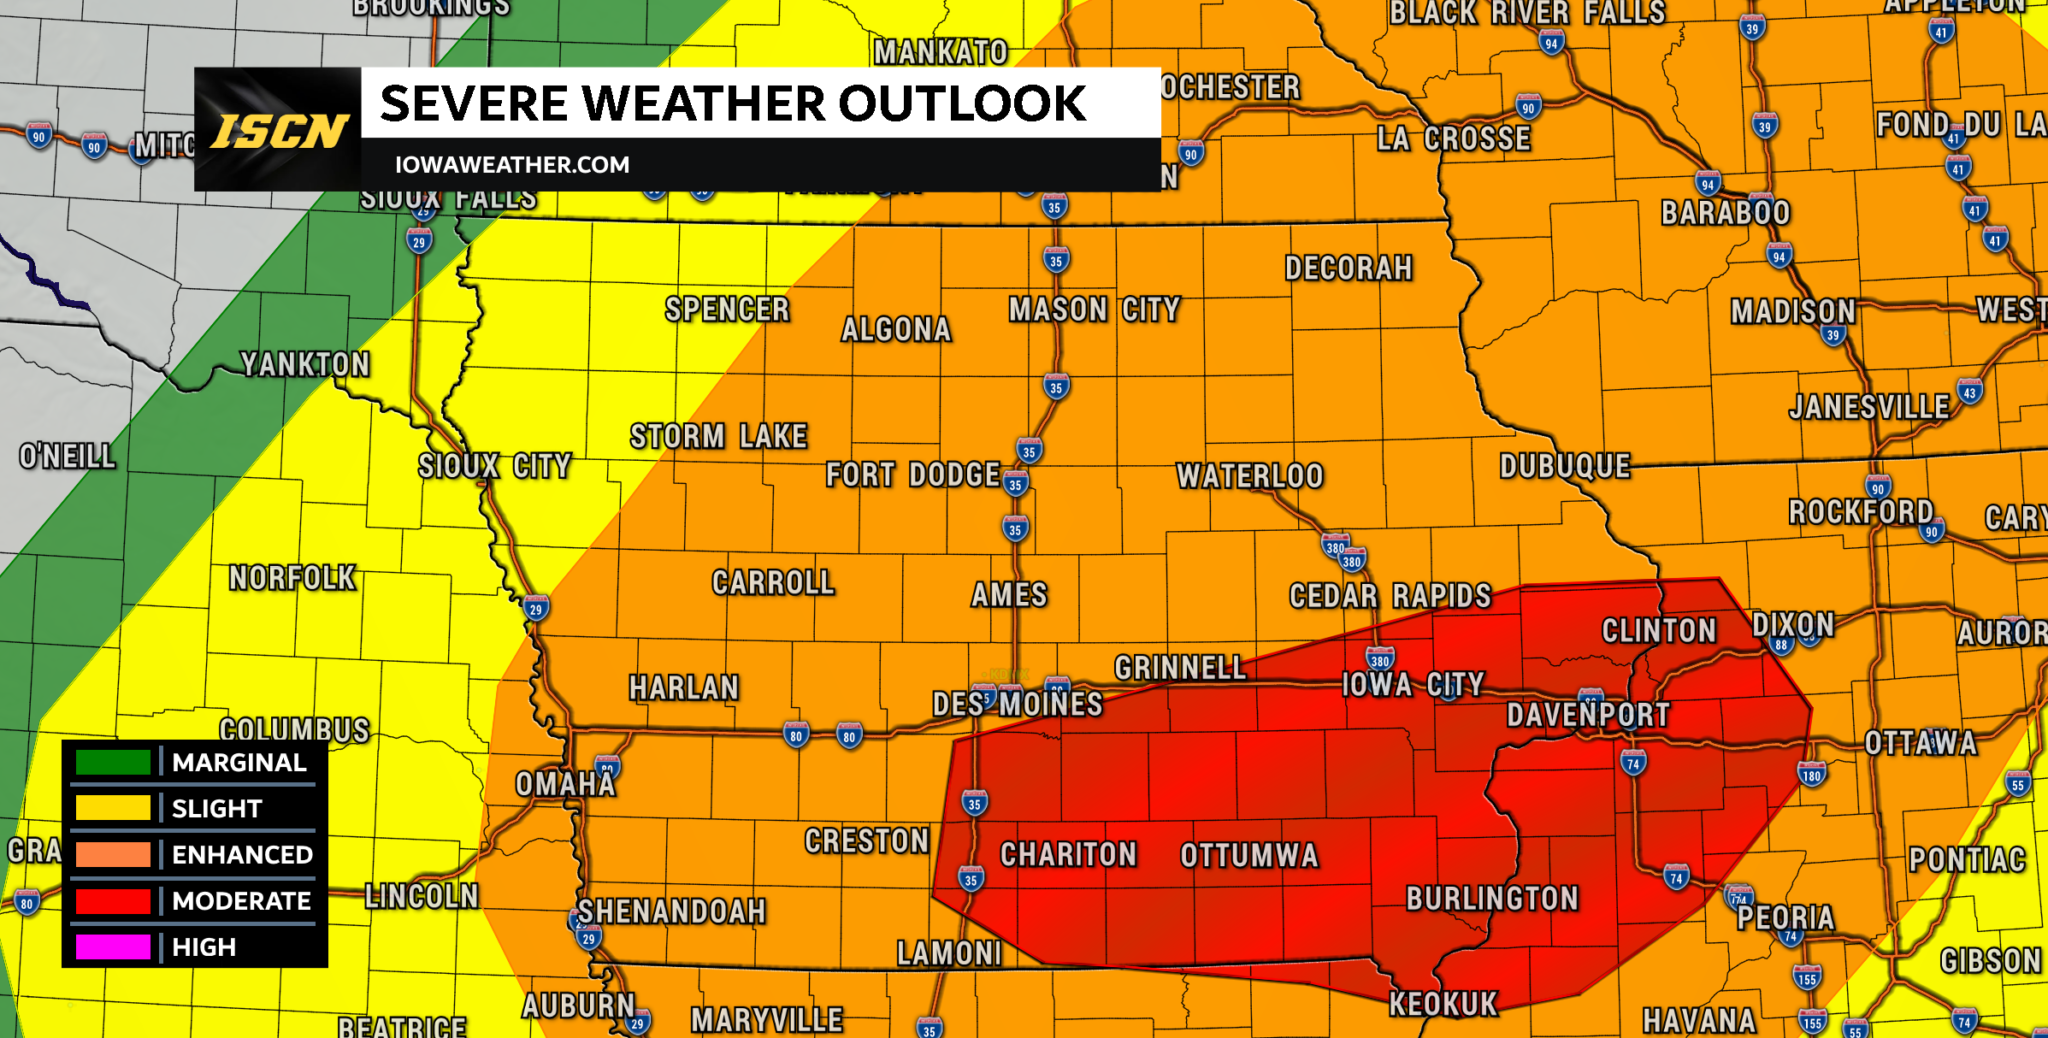 Moderate Risk of Severe Weather Issued for Tuesday in Iowa